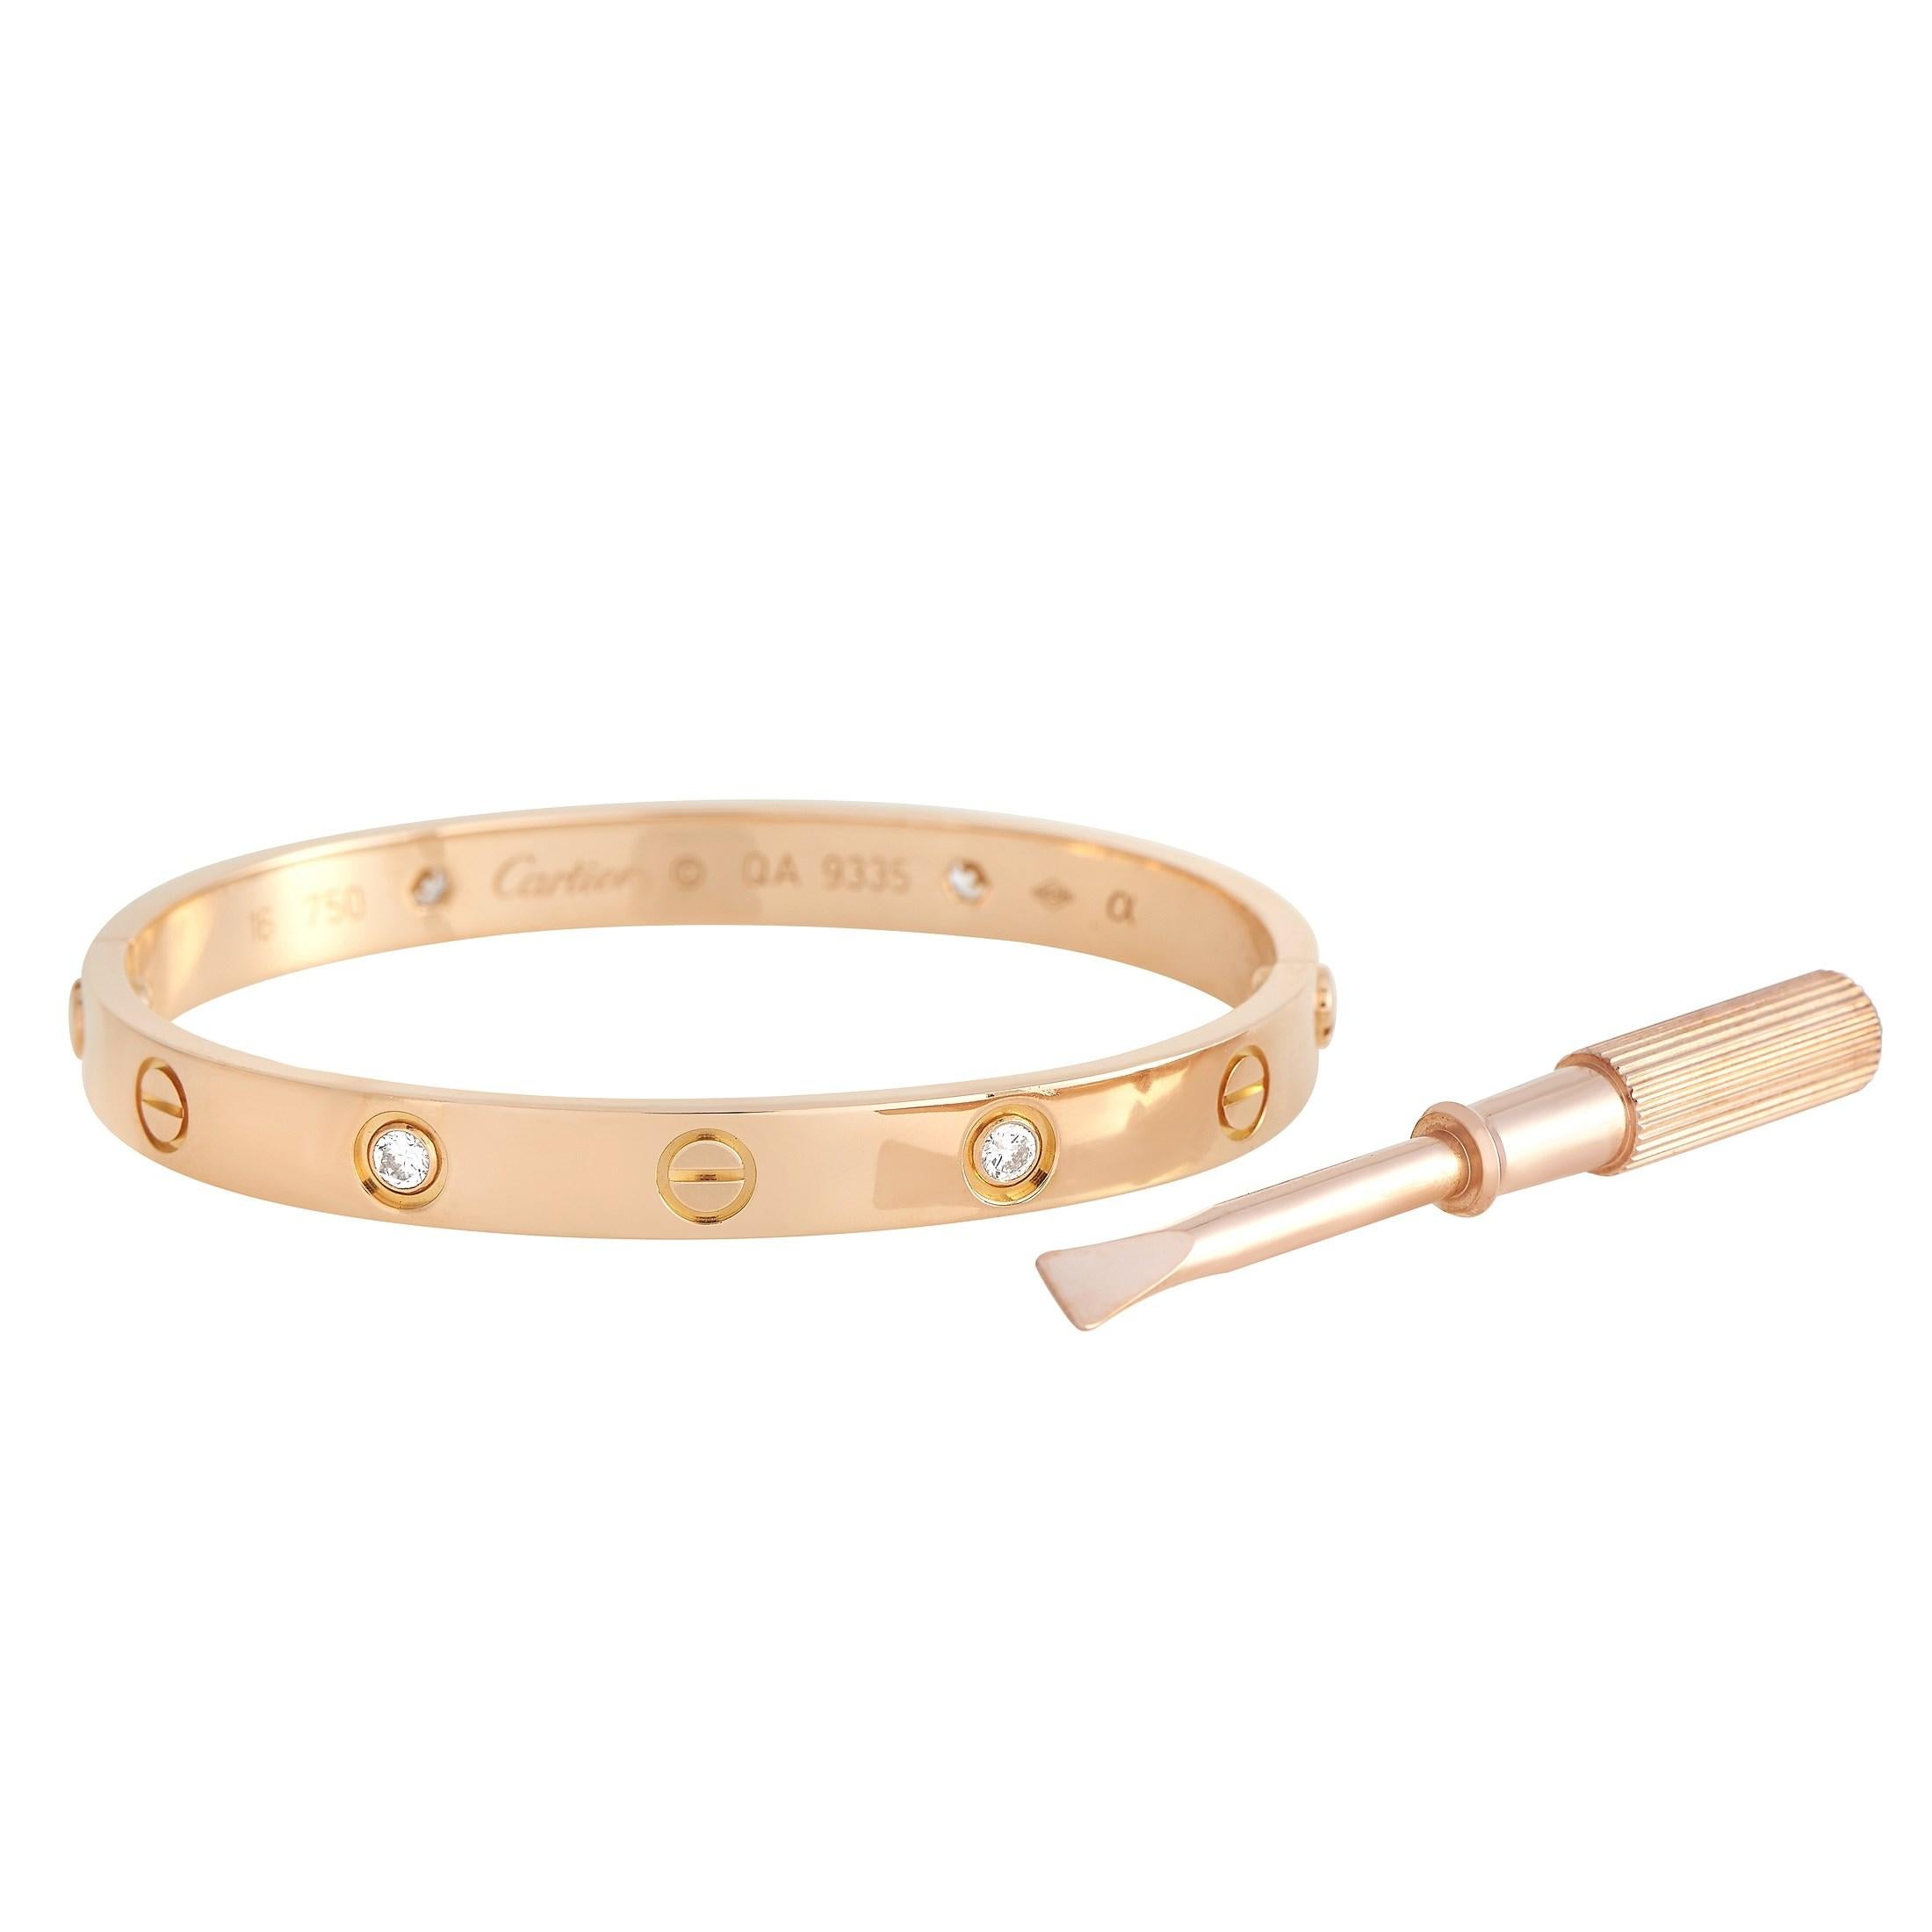 Chic and incredibly sophisticated, a Cartier LOVE bracelet will never go out of style. This iconic piece is crafted from opulent 18K Rose Gold and features 4 sparkling diamonds alternating alongside the brand’s signature circular accents. This size